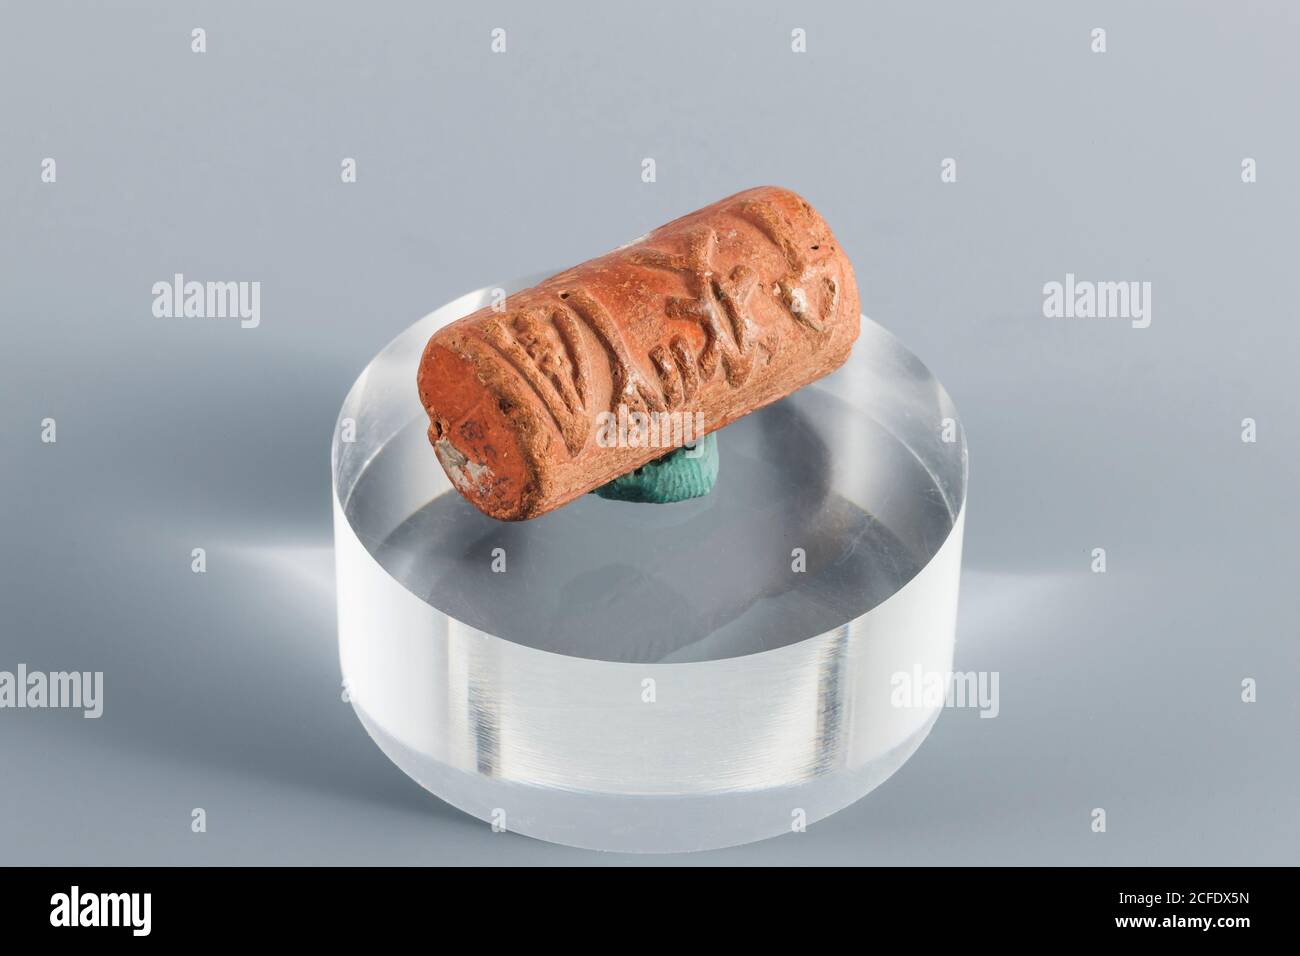 Cylindrical Seal, amulet,from Mohenjo daro, Indus valley civilization Gallery, National Museum of Pakistan, Karachi, Sindh, Pakistan, South Asia, Asia Stock Photo